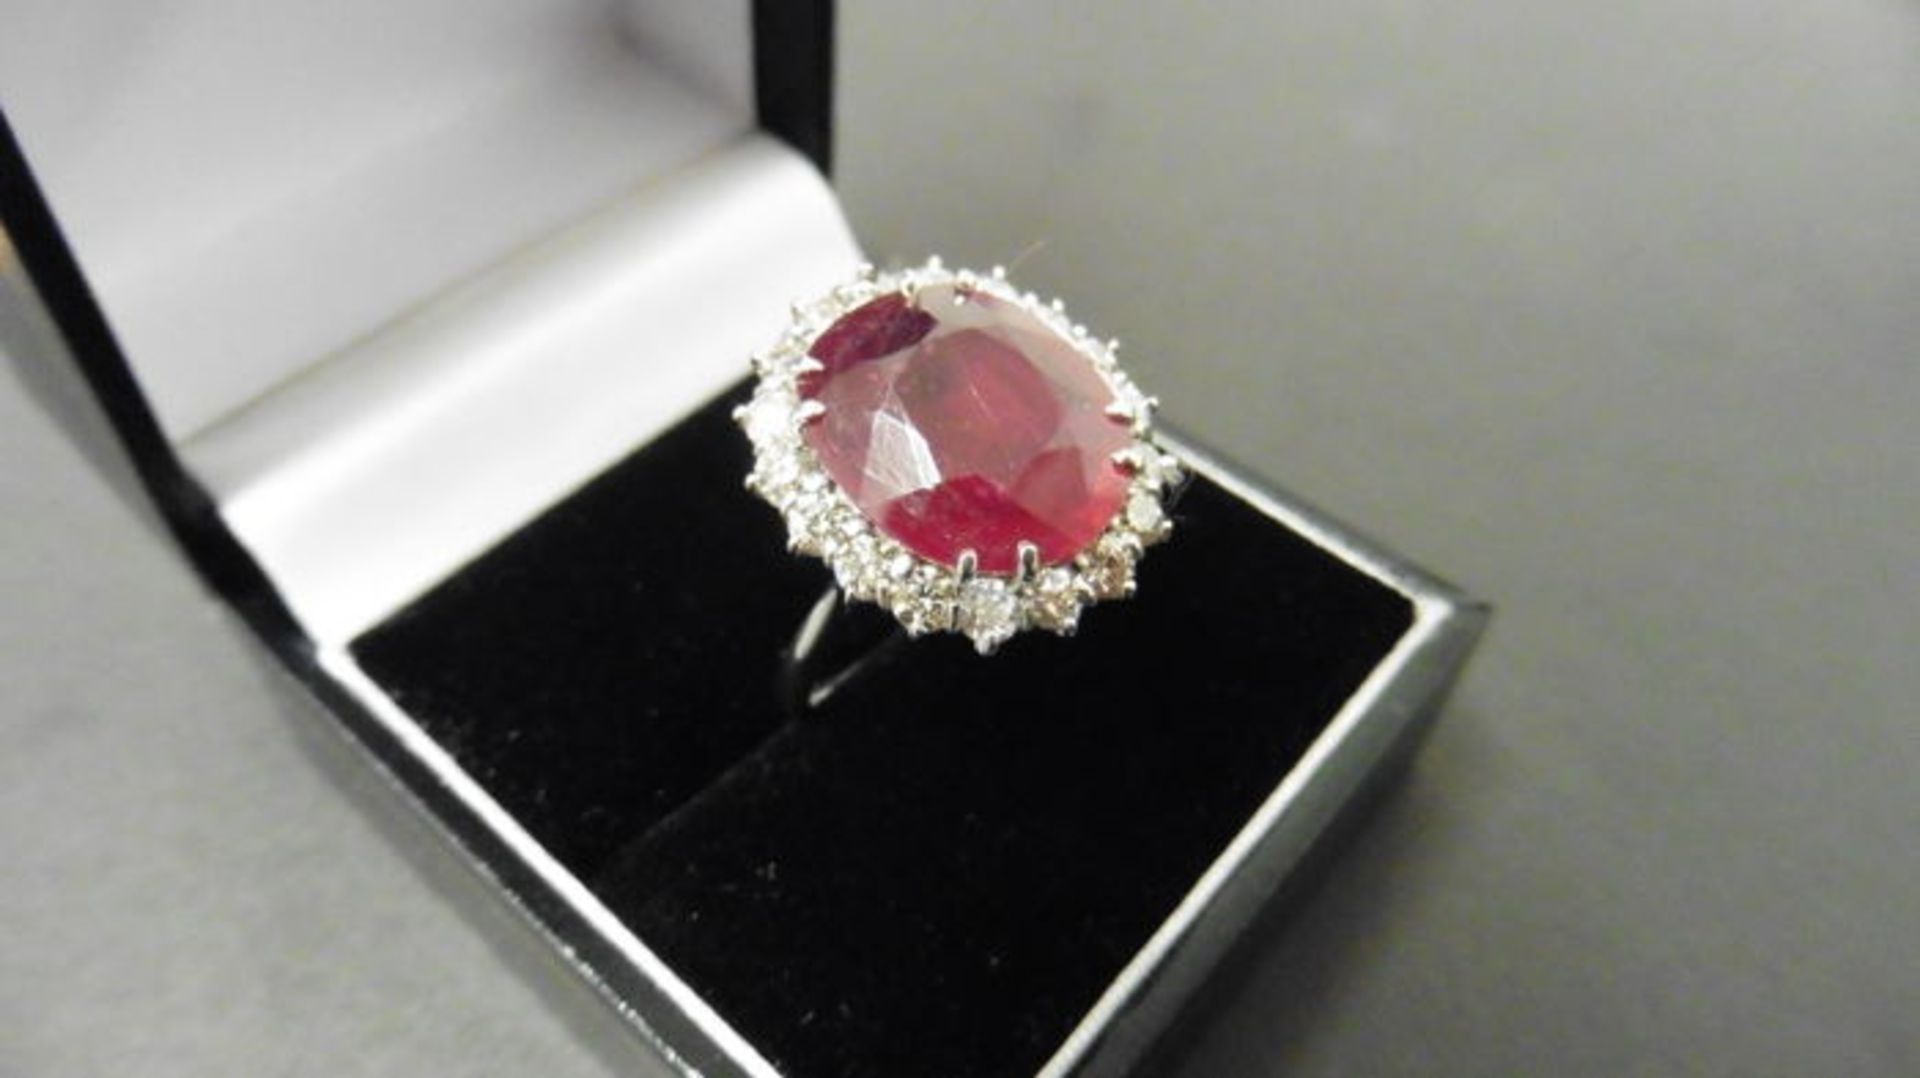 9ct ruby and diamond cluster ring. Oval cut ruby( glass filled) in the centre surrounded by - Image 4 of 4